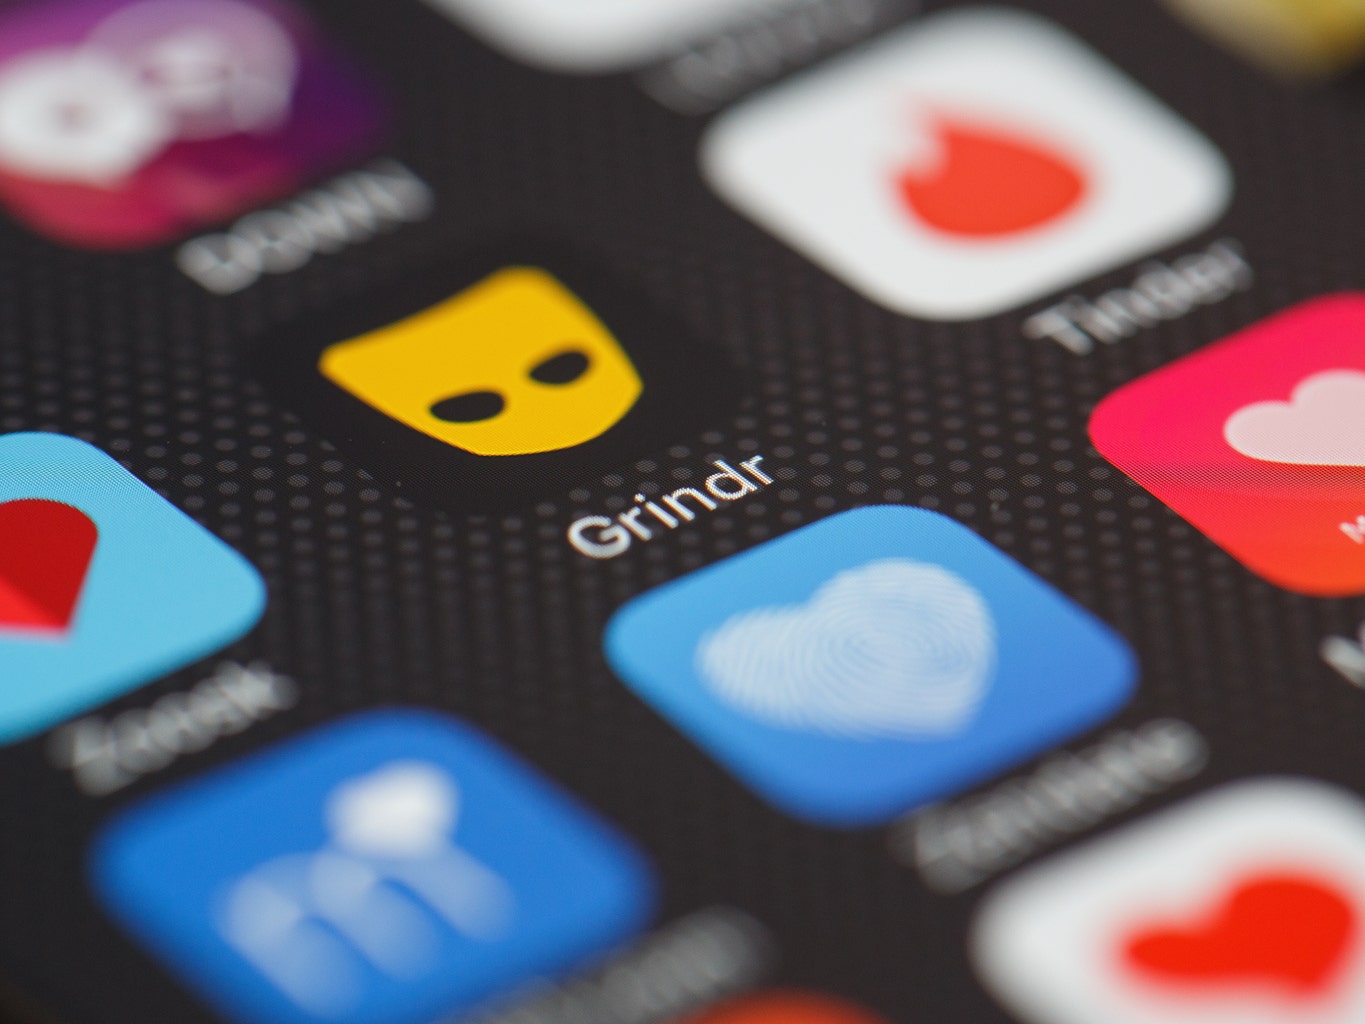 Gay-dating app Grindr said to agree to go public through SPAC deal (NYSE:TINV) | Seeking Alpha